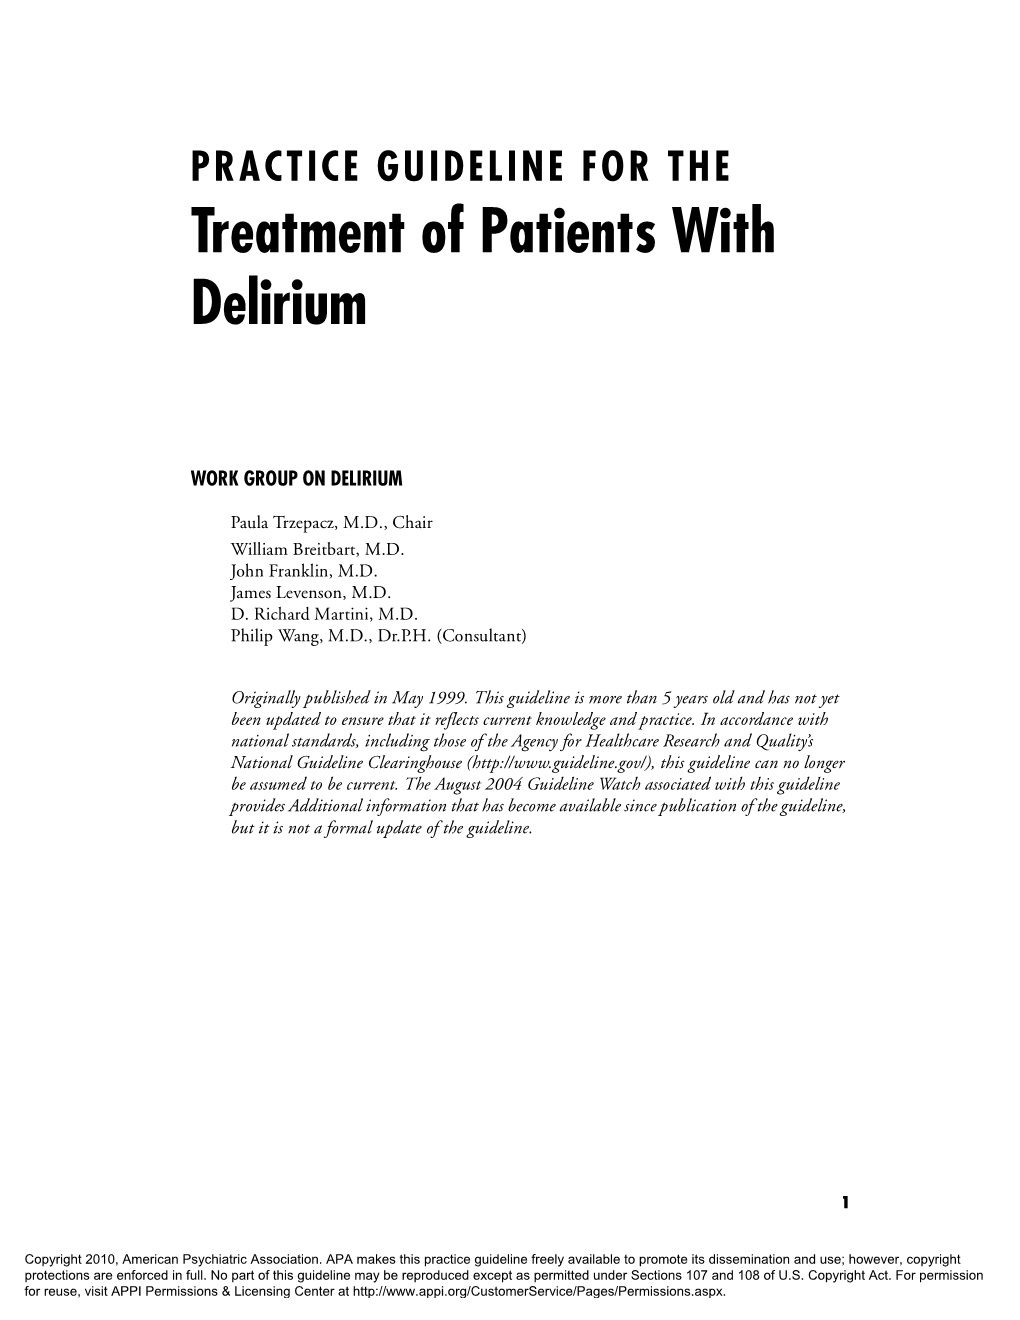 APA: Practice Guideline for the Treatment of Patients with Delirium